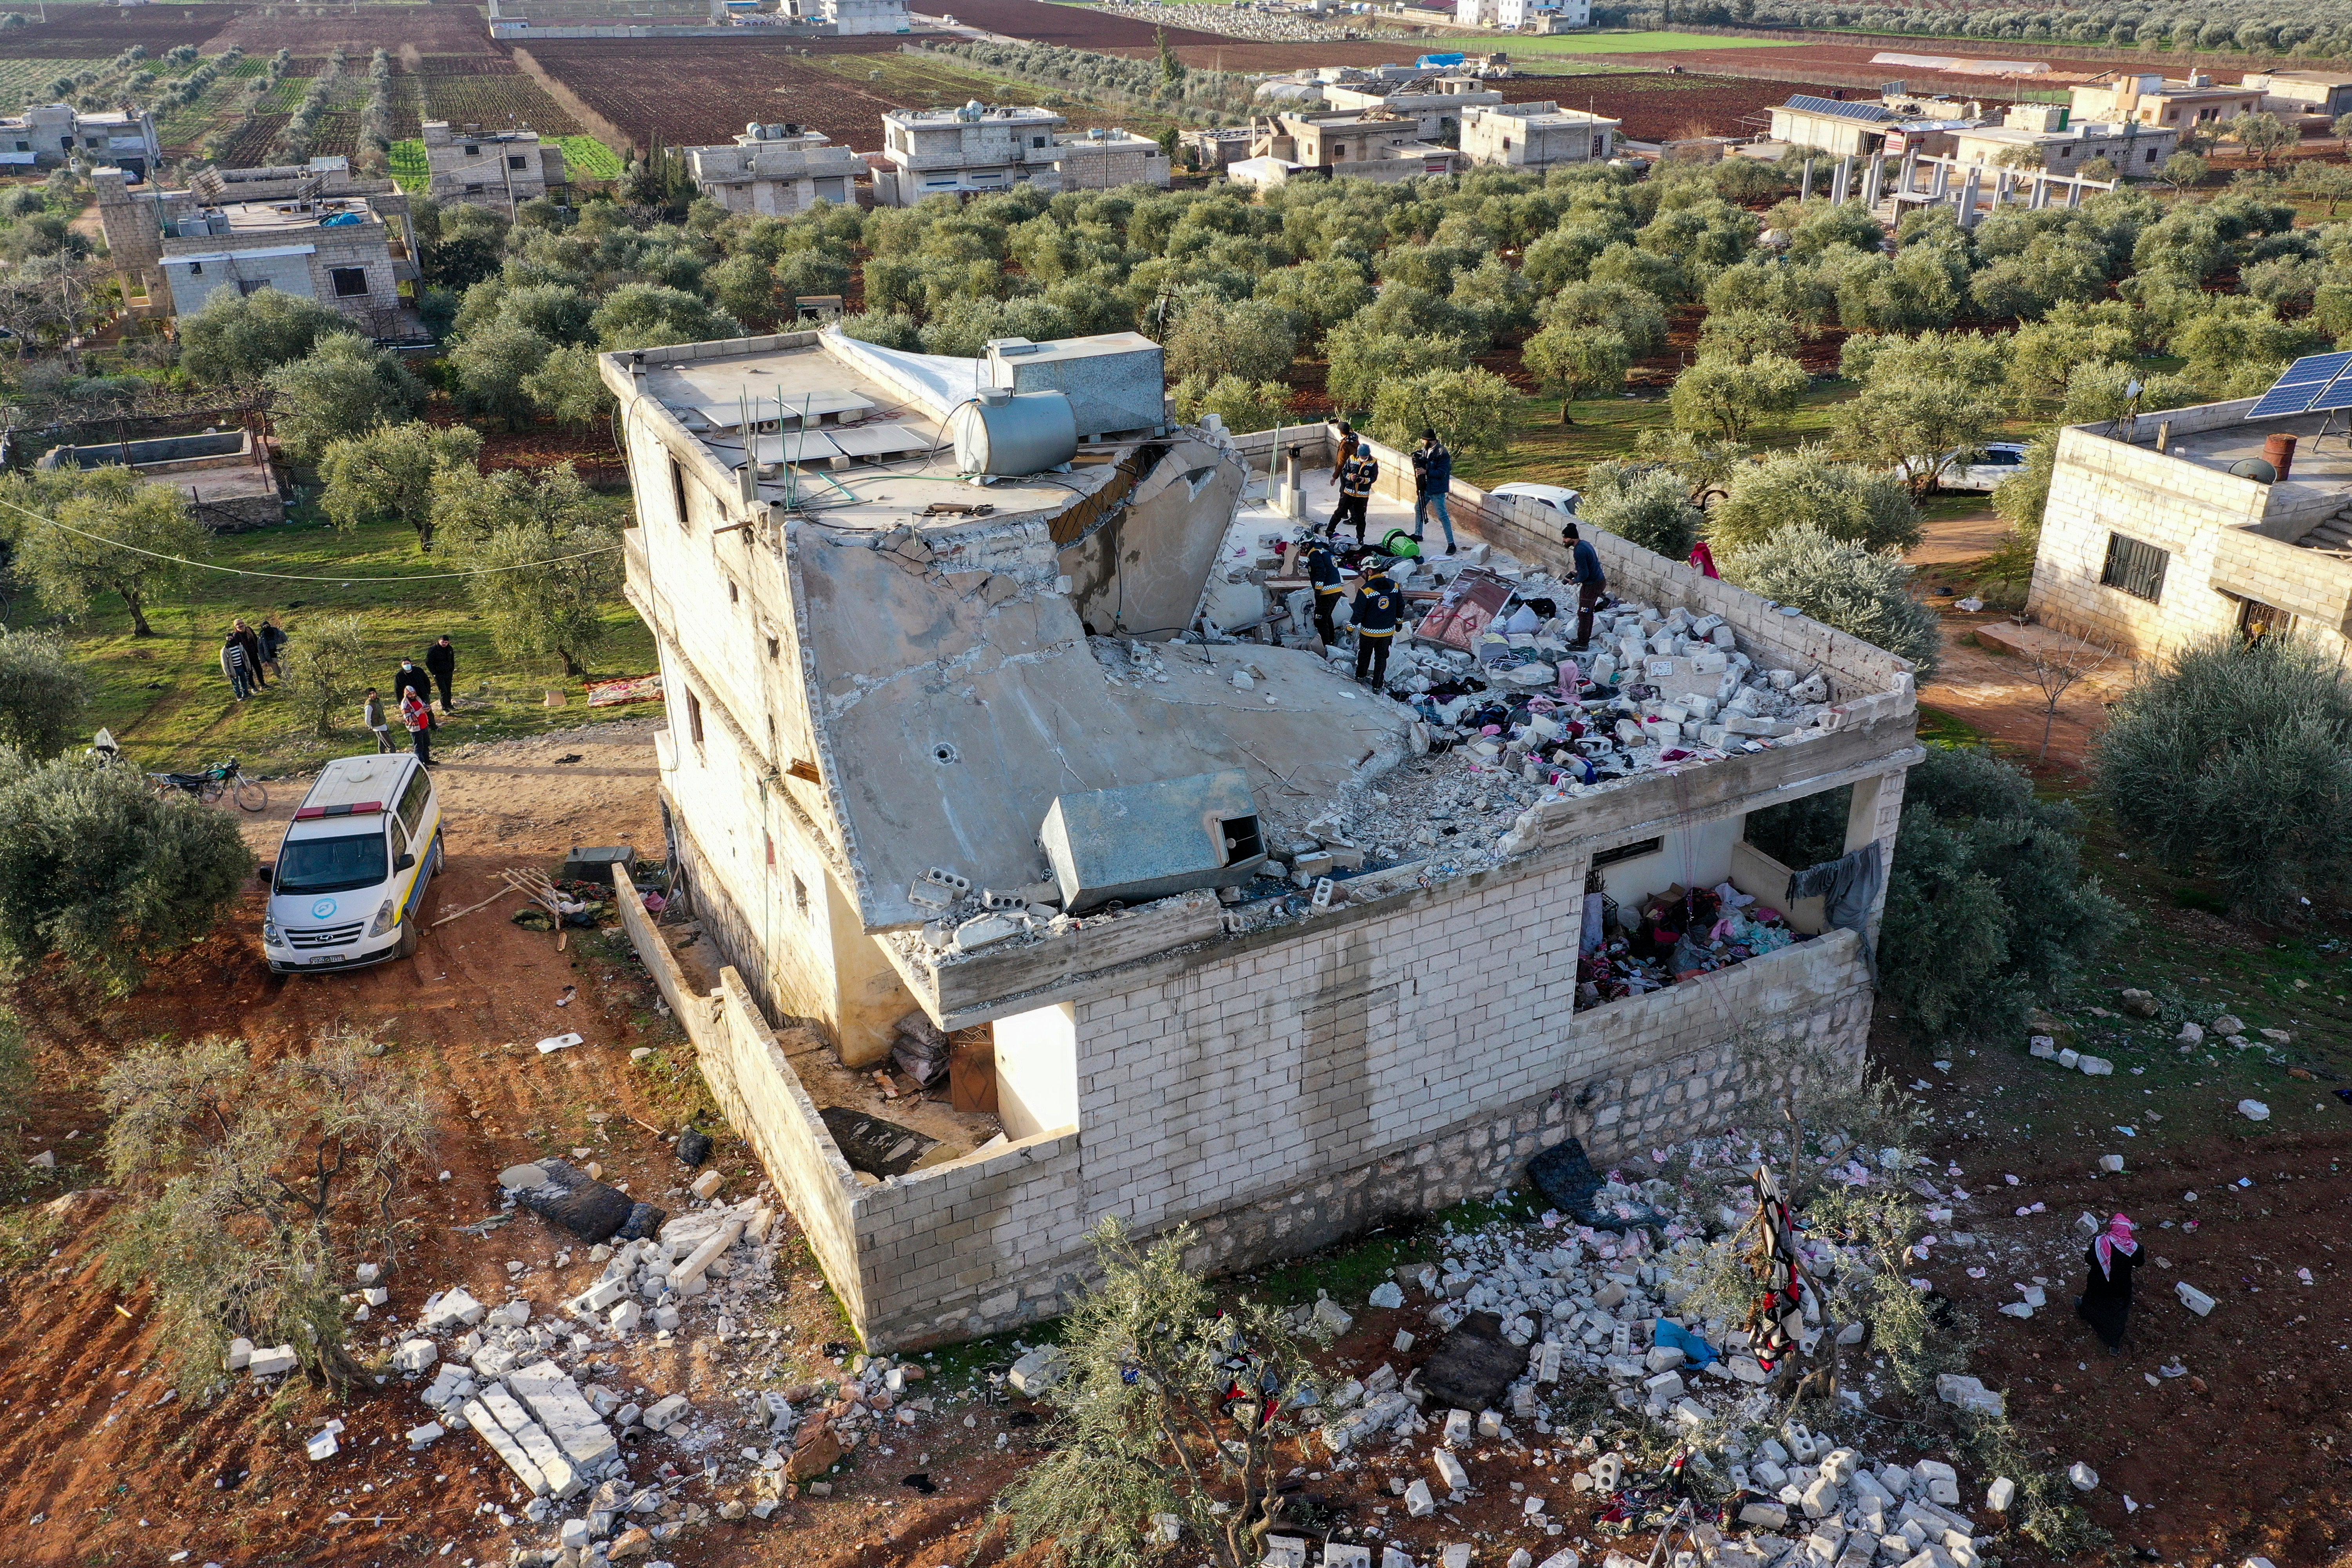 People inspect a destroyed house following an operation by the U.S. military in the Syrian village of Atmeh, in Idlib province, Syria, Thursday, Feb. 3, 2022